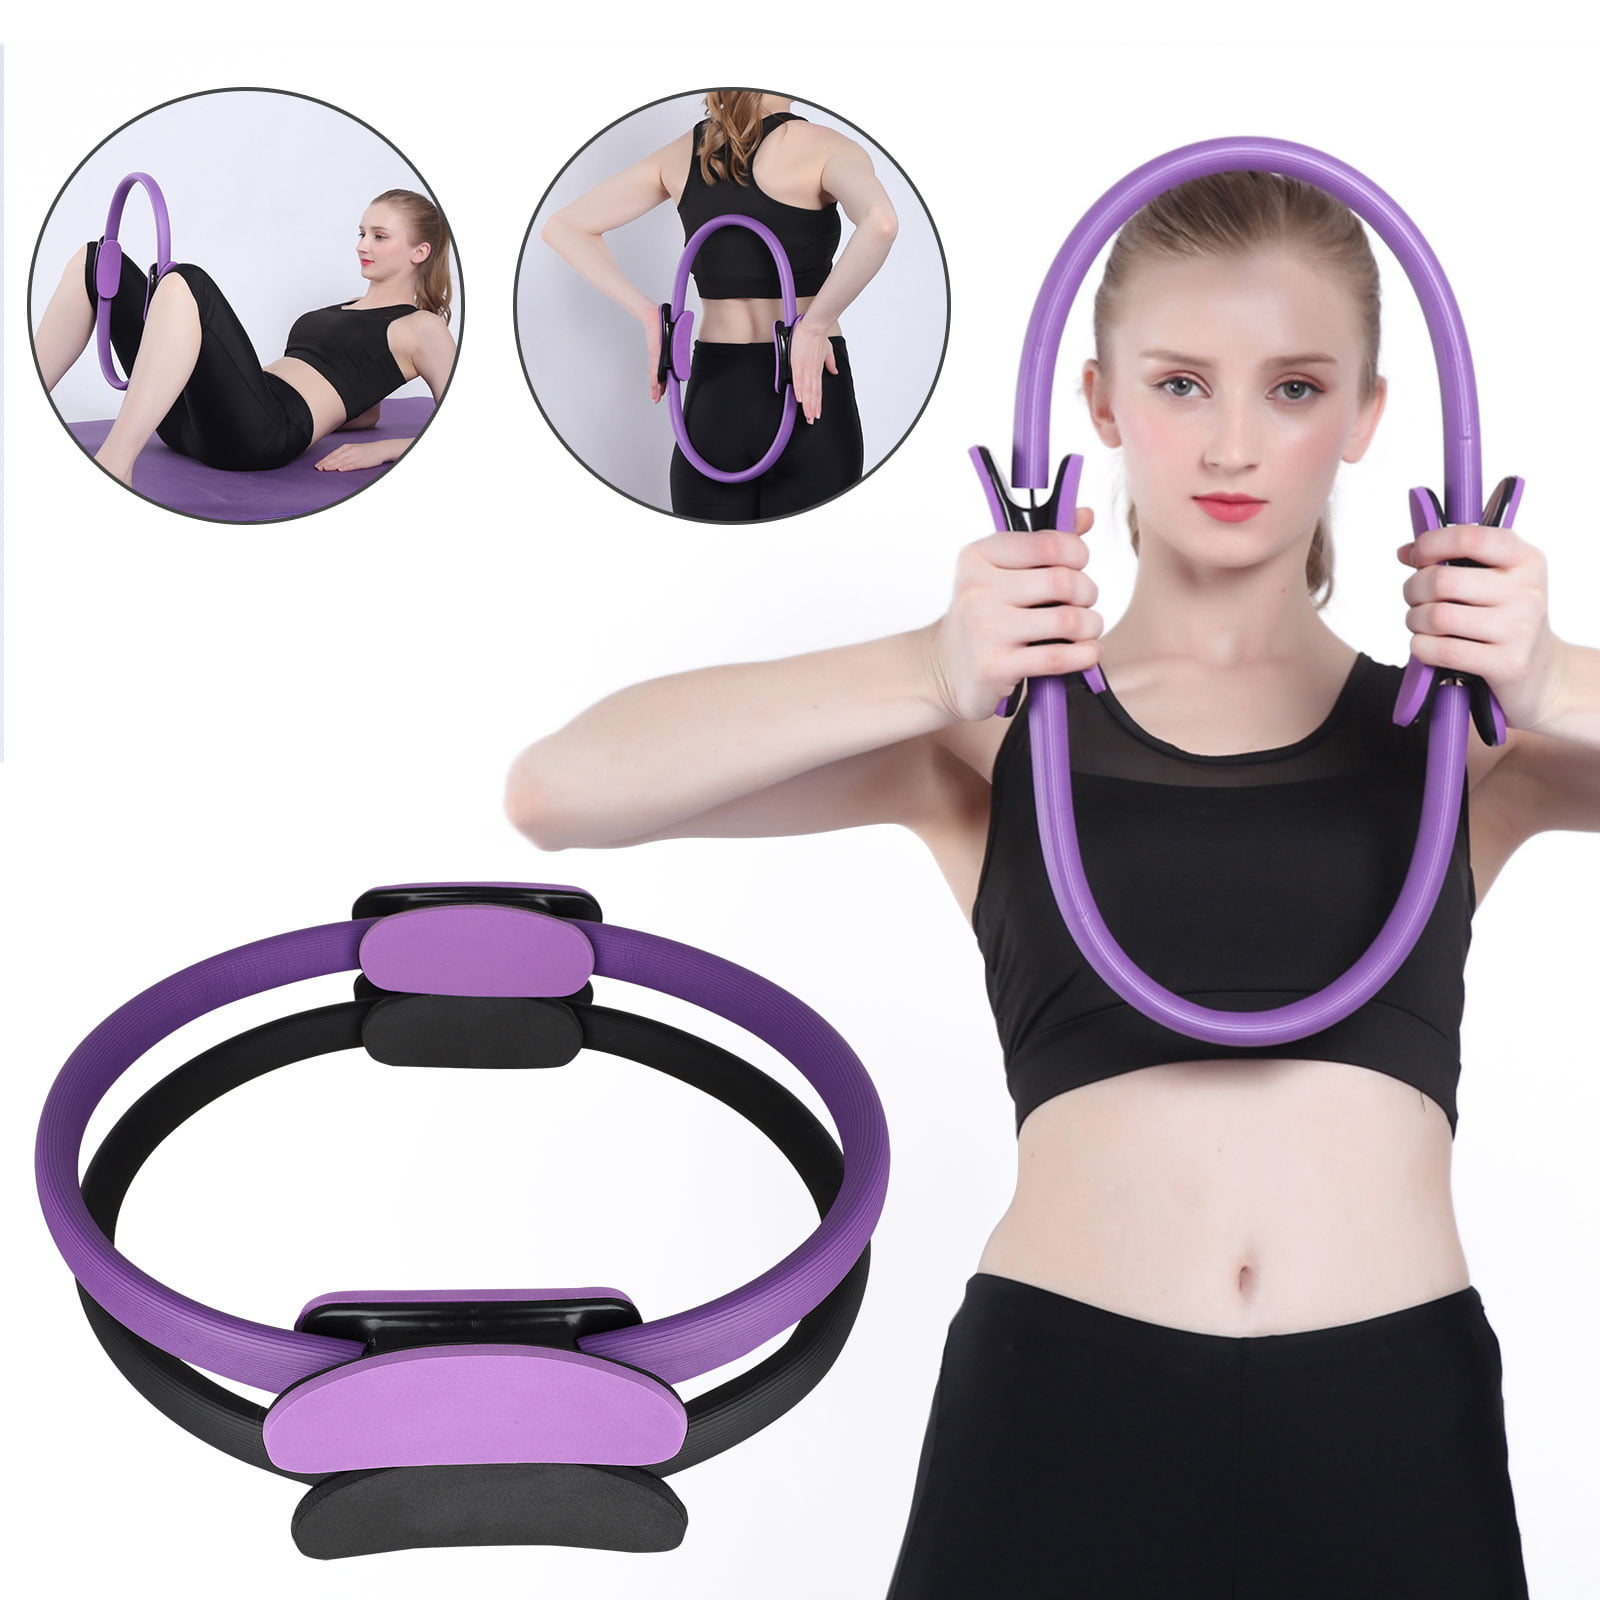 EEEkit Pilates Ring, 15" Magic Circle Fitness Pilates Ring, Pilates Yoga Dual Grip Resistance Ring Circle for Body Sculpting, Toning Inner Thighs, and Weight Loss, Fitness Equipment for Home or Studio - Walmart.com